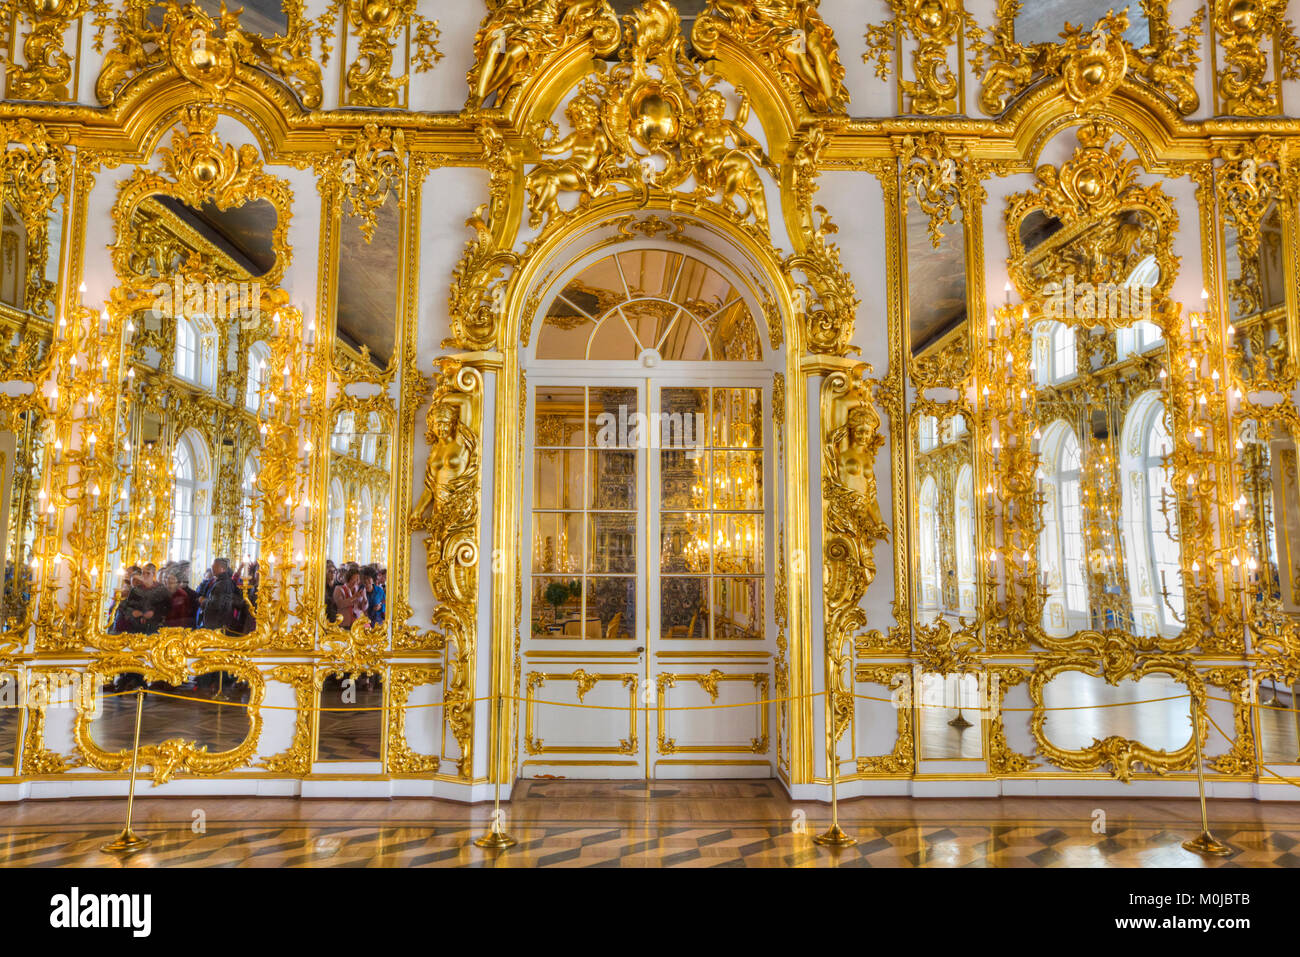 Ornate decorative walls in gold designs in the Great Hall, Catherine Palace; Tsarskoye Selo, Pushkin, Russia Stock Photo